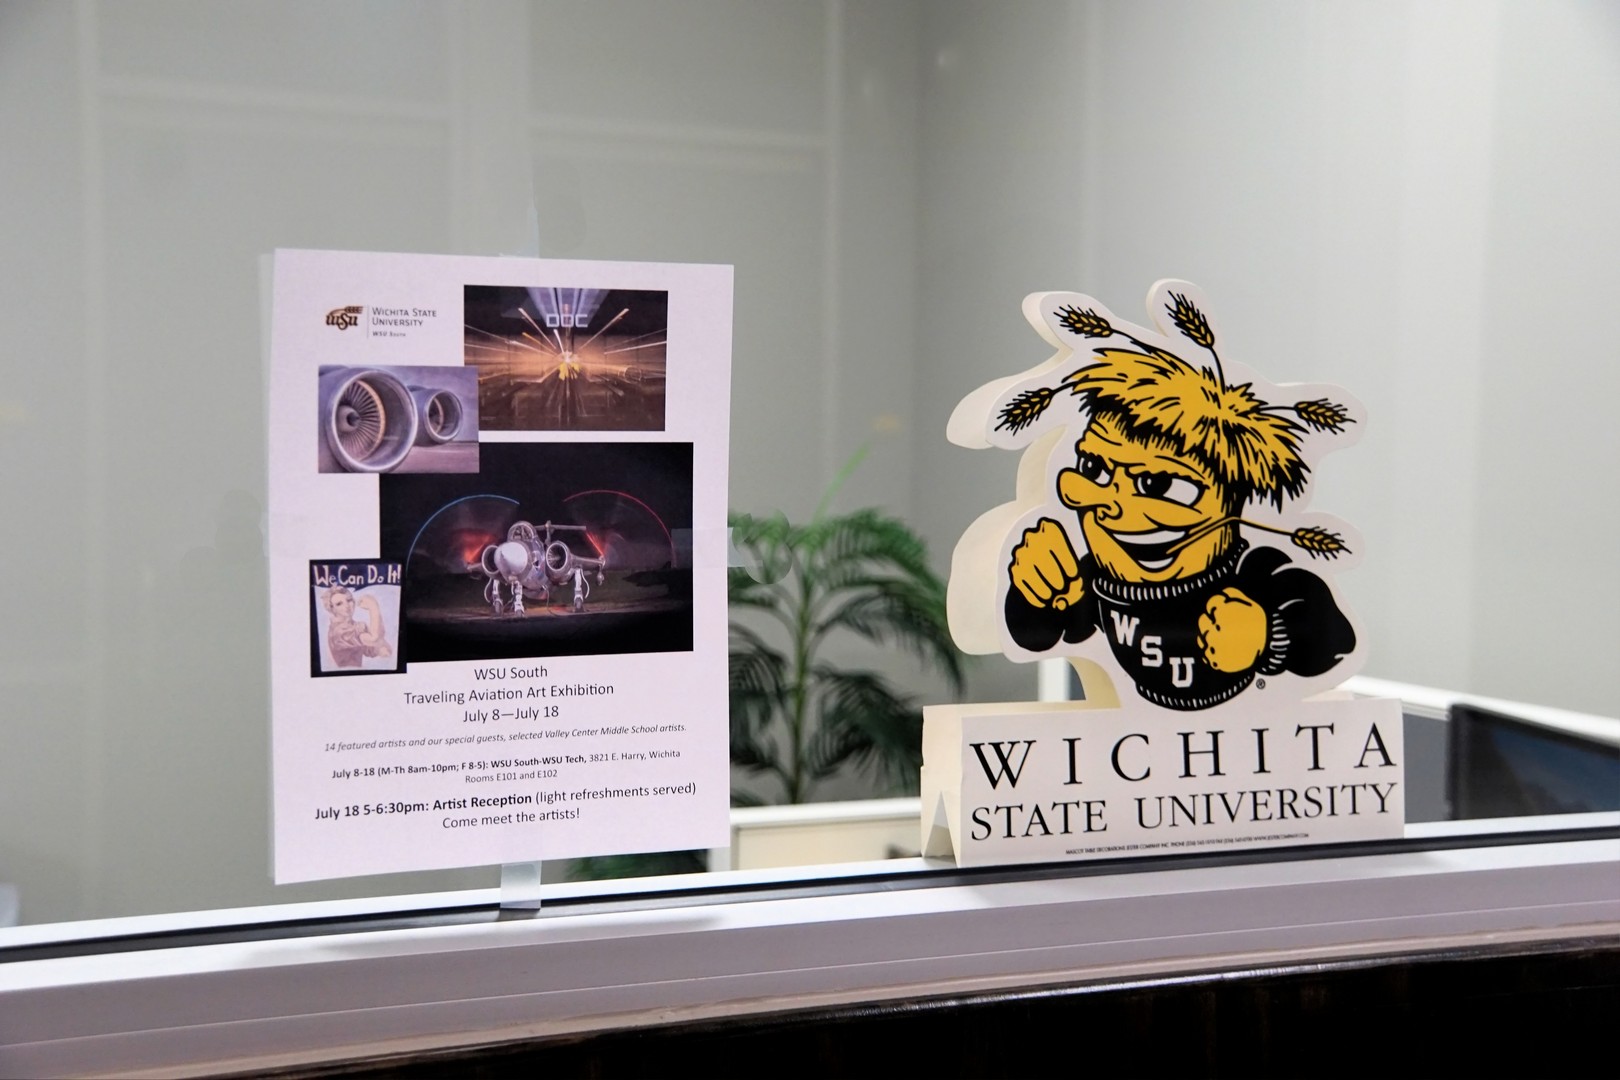 The 2019 WSU Haysville and WSU South Traveling Art Exhibition